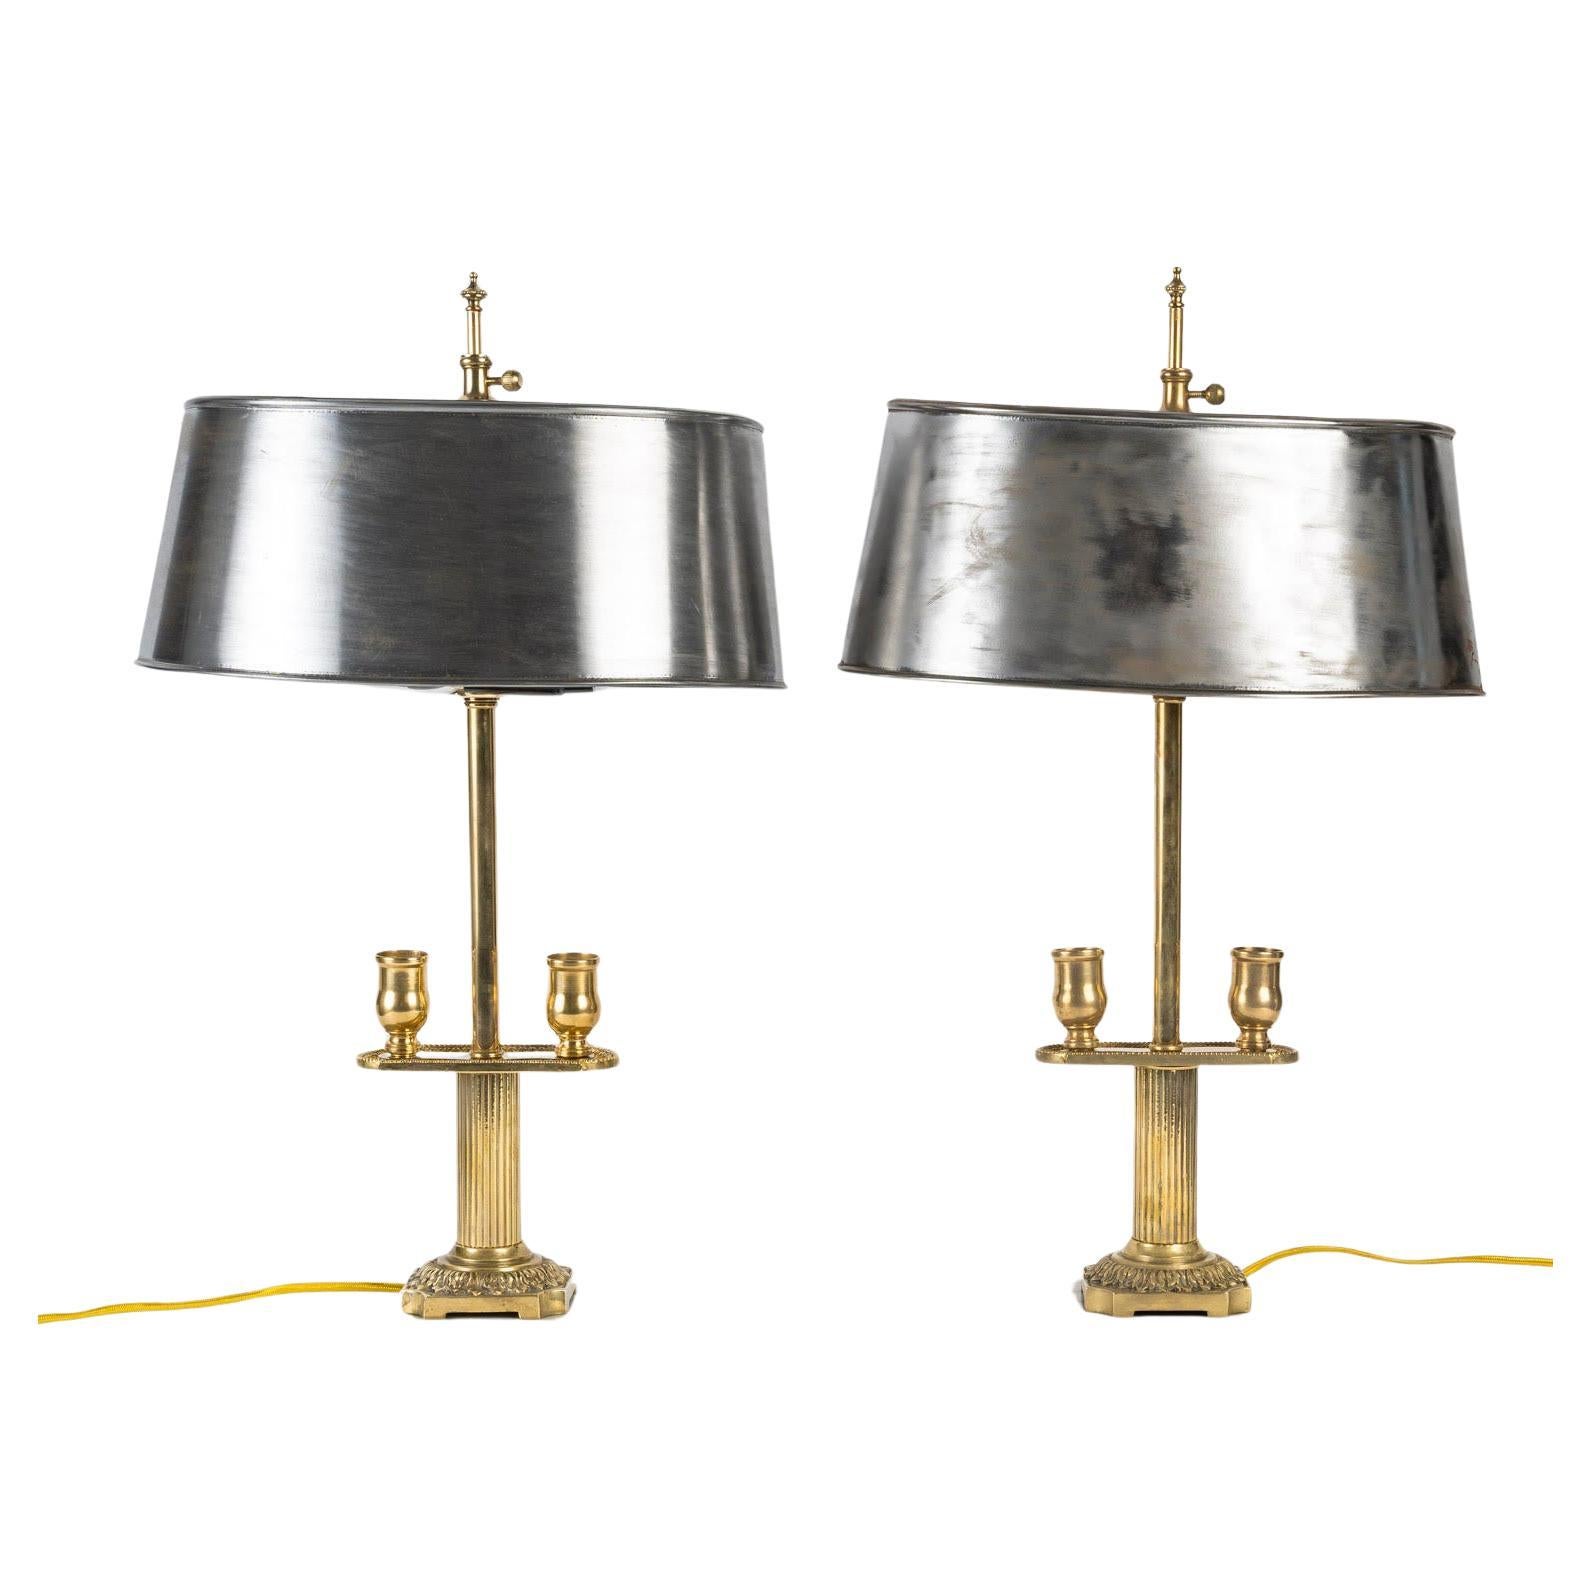 Pair of Candlesticks Mounted as Table Lamps, 19th Century, Napoleon III Period. For Sale